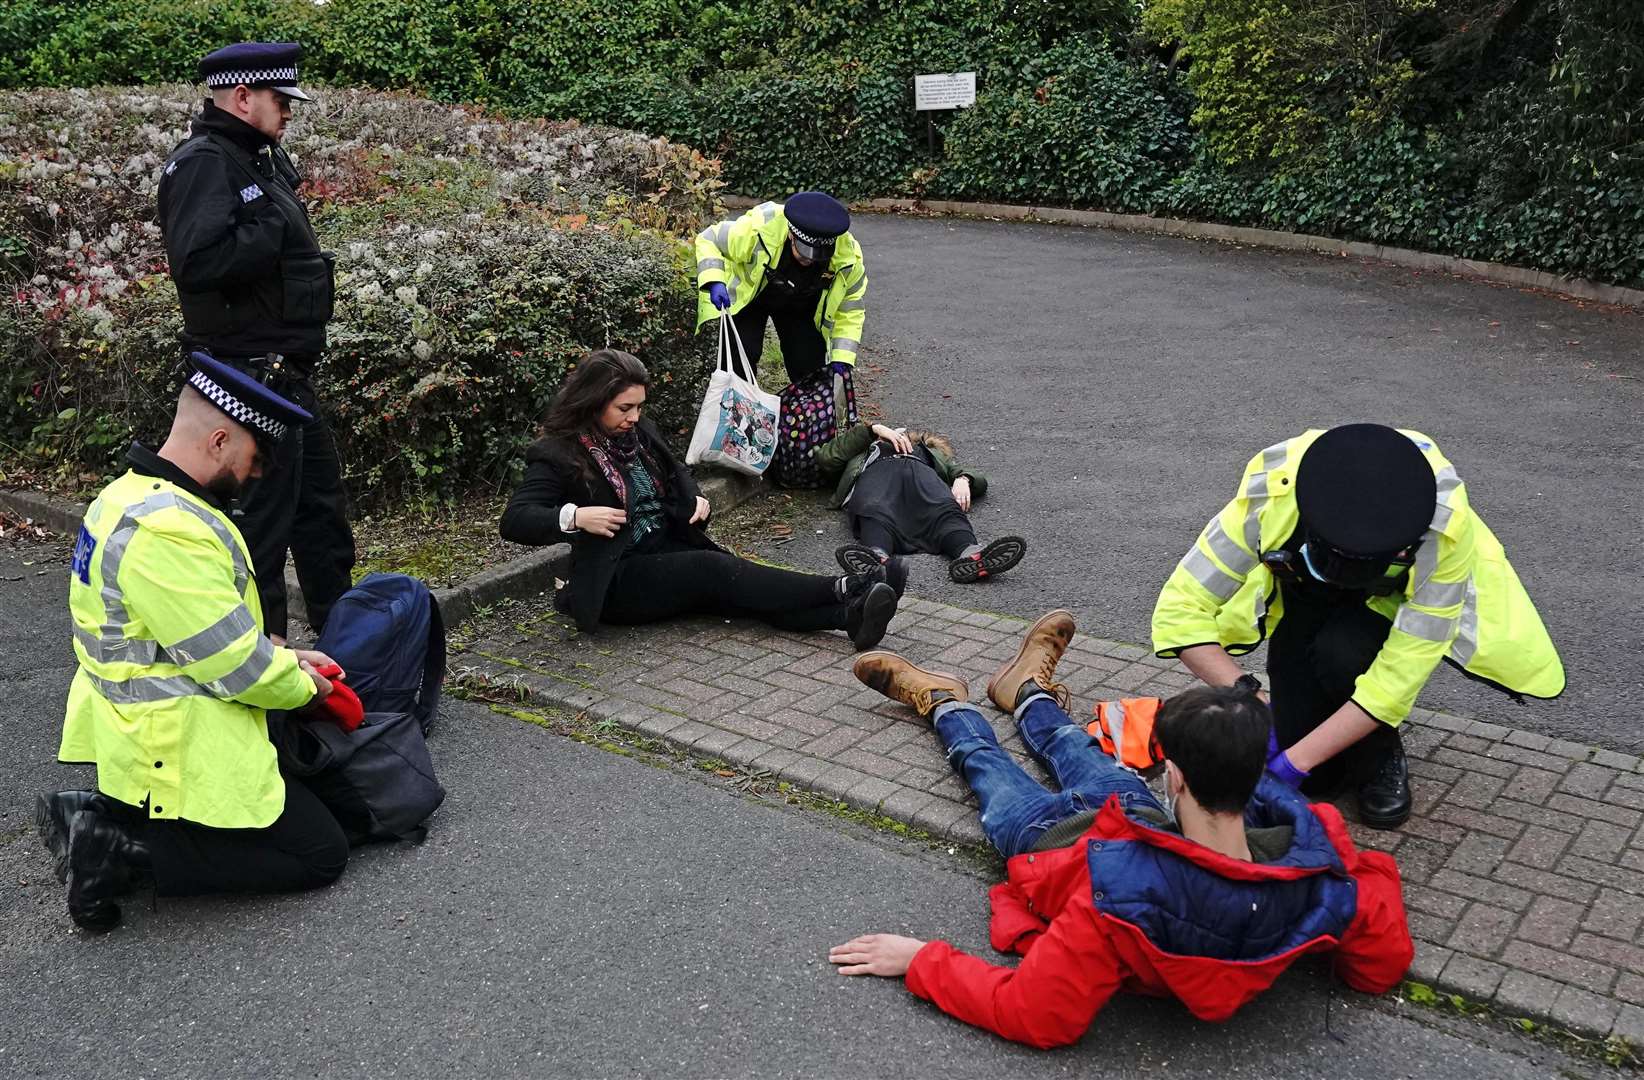 Protesters from Insulate Britain are arrested by police in the car park of the DoubleTree Hilton at Dartford Crossing (Jonathan Brady/PA)